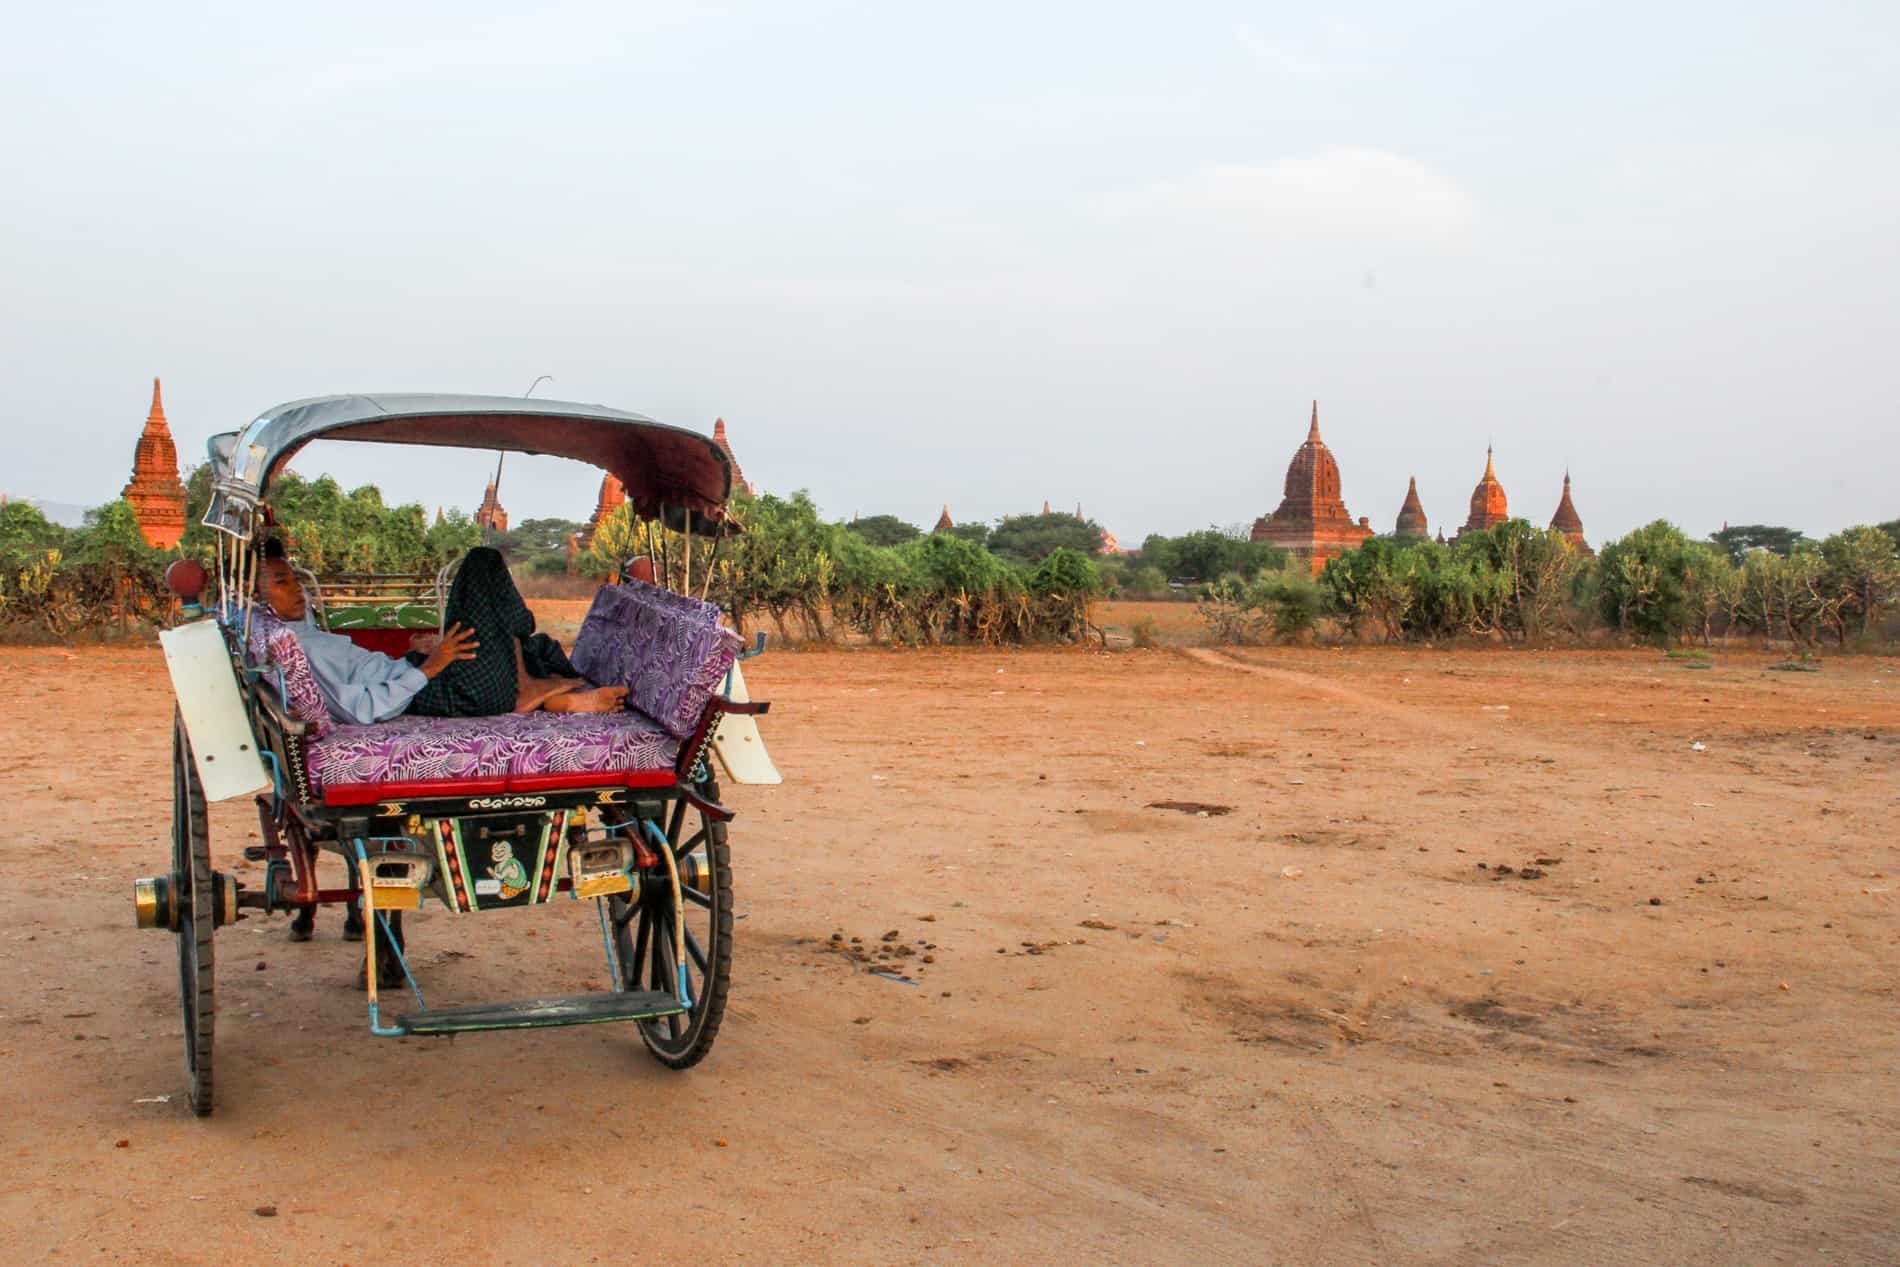 A male horse and cart driver rests in the carriage of his horse cart in front of a scattering of temples on orange dusty ground in Bagan, Myanmar.